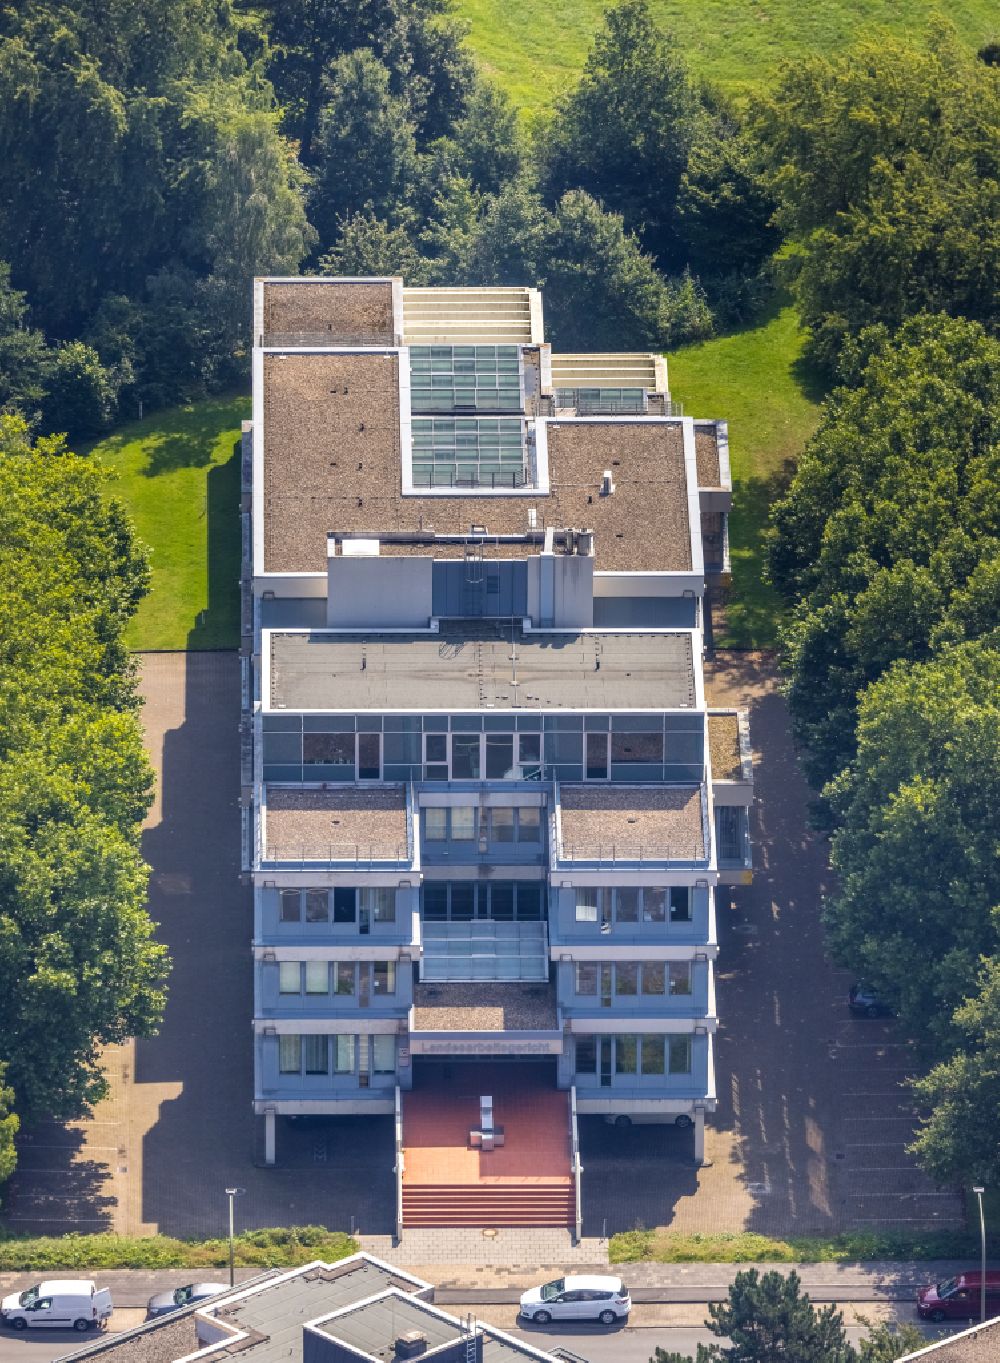 Aerial photograph Hamm - Court- Building complex of of Landesarbeitsgericht Hamm on Marker Allee in Hamm at Ruhrgebiet in the state North Rhine-Westphalia, Germany